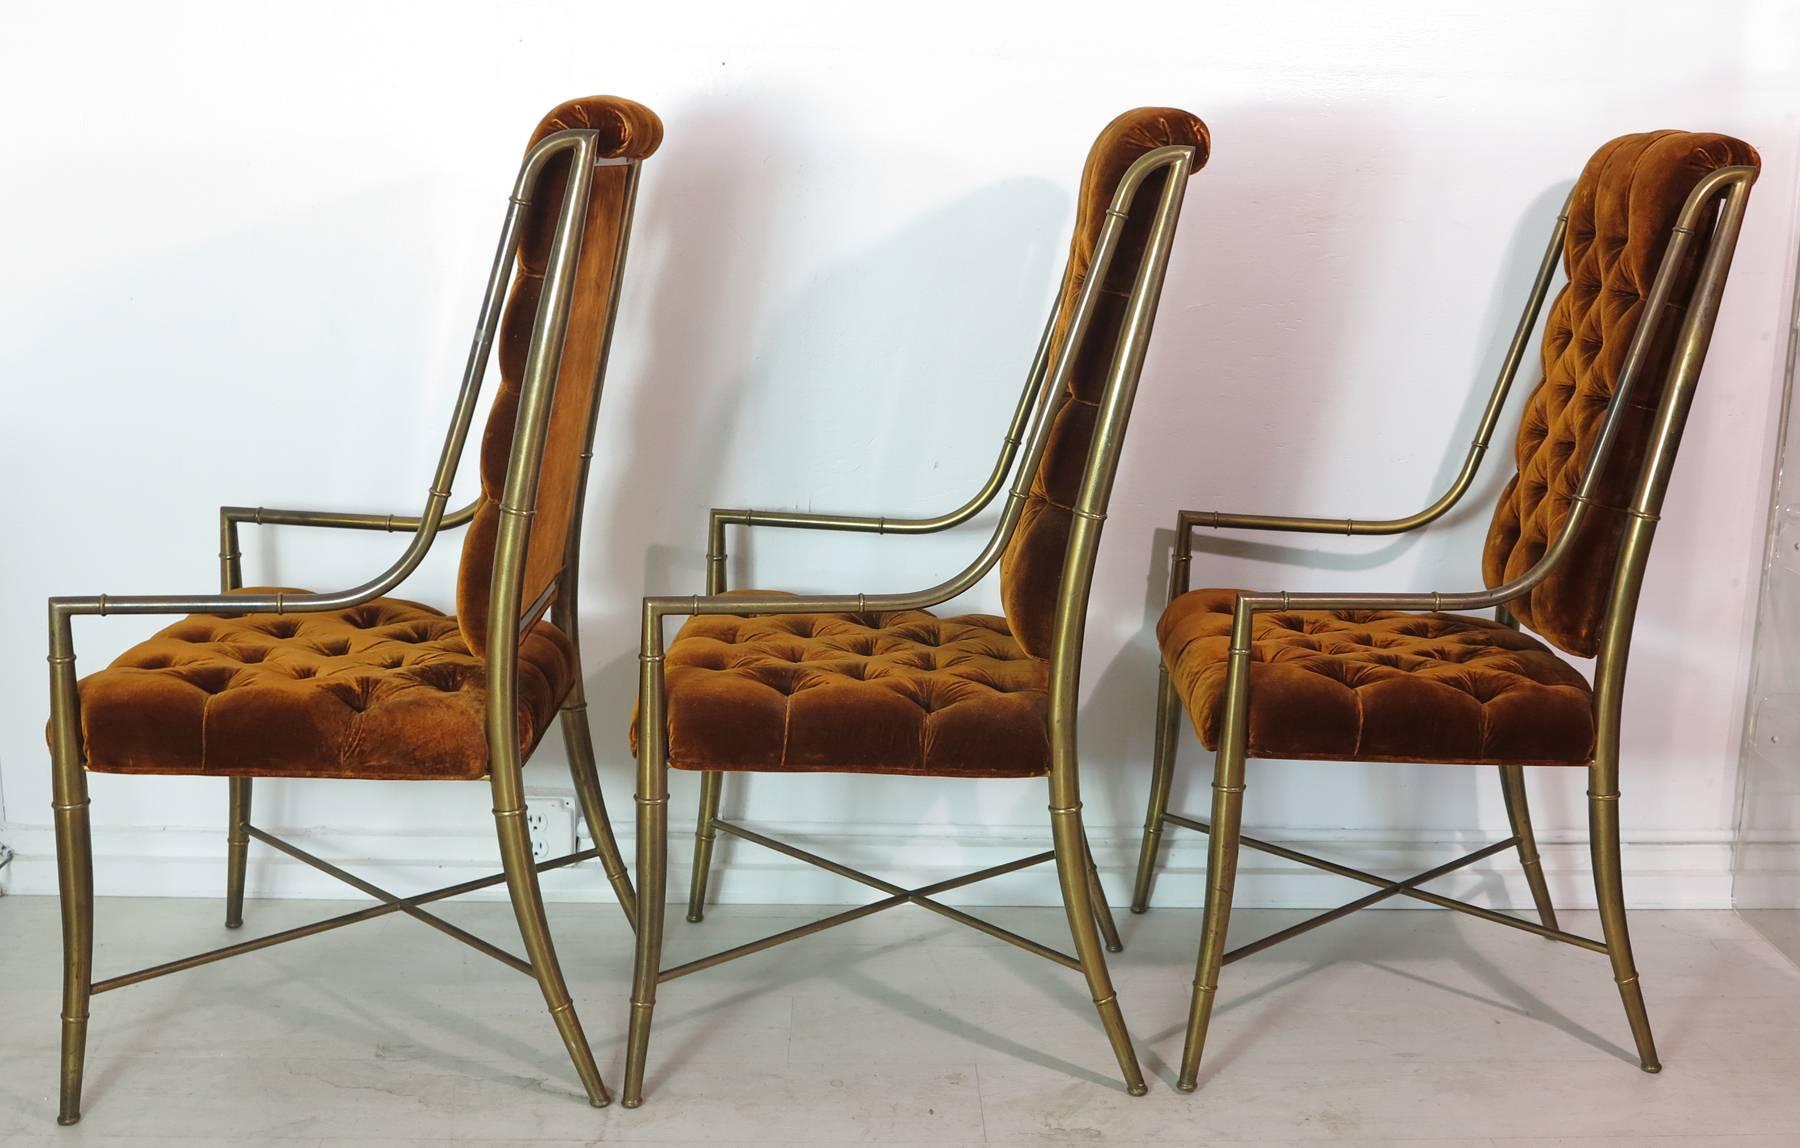 Vintage faux bamboo mastercraft brass imperial chairs set of six. Original velvet upholstery.